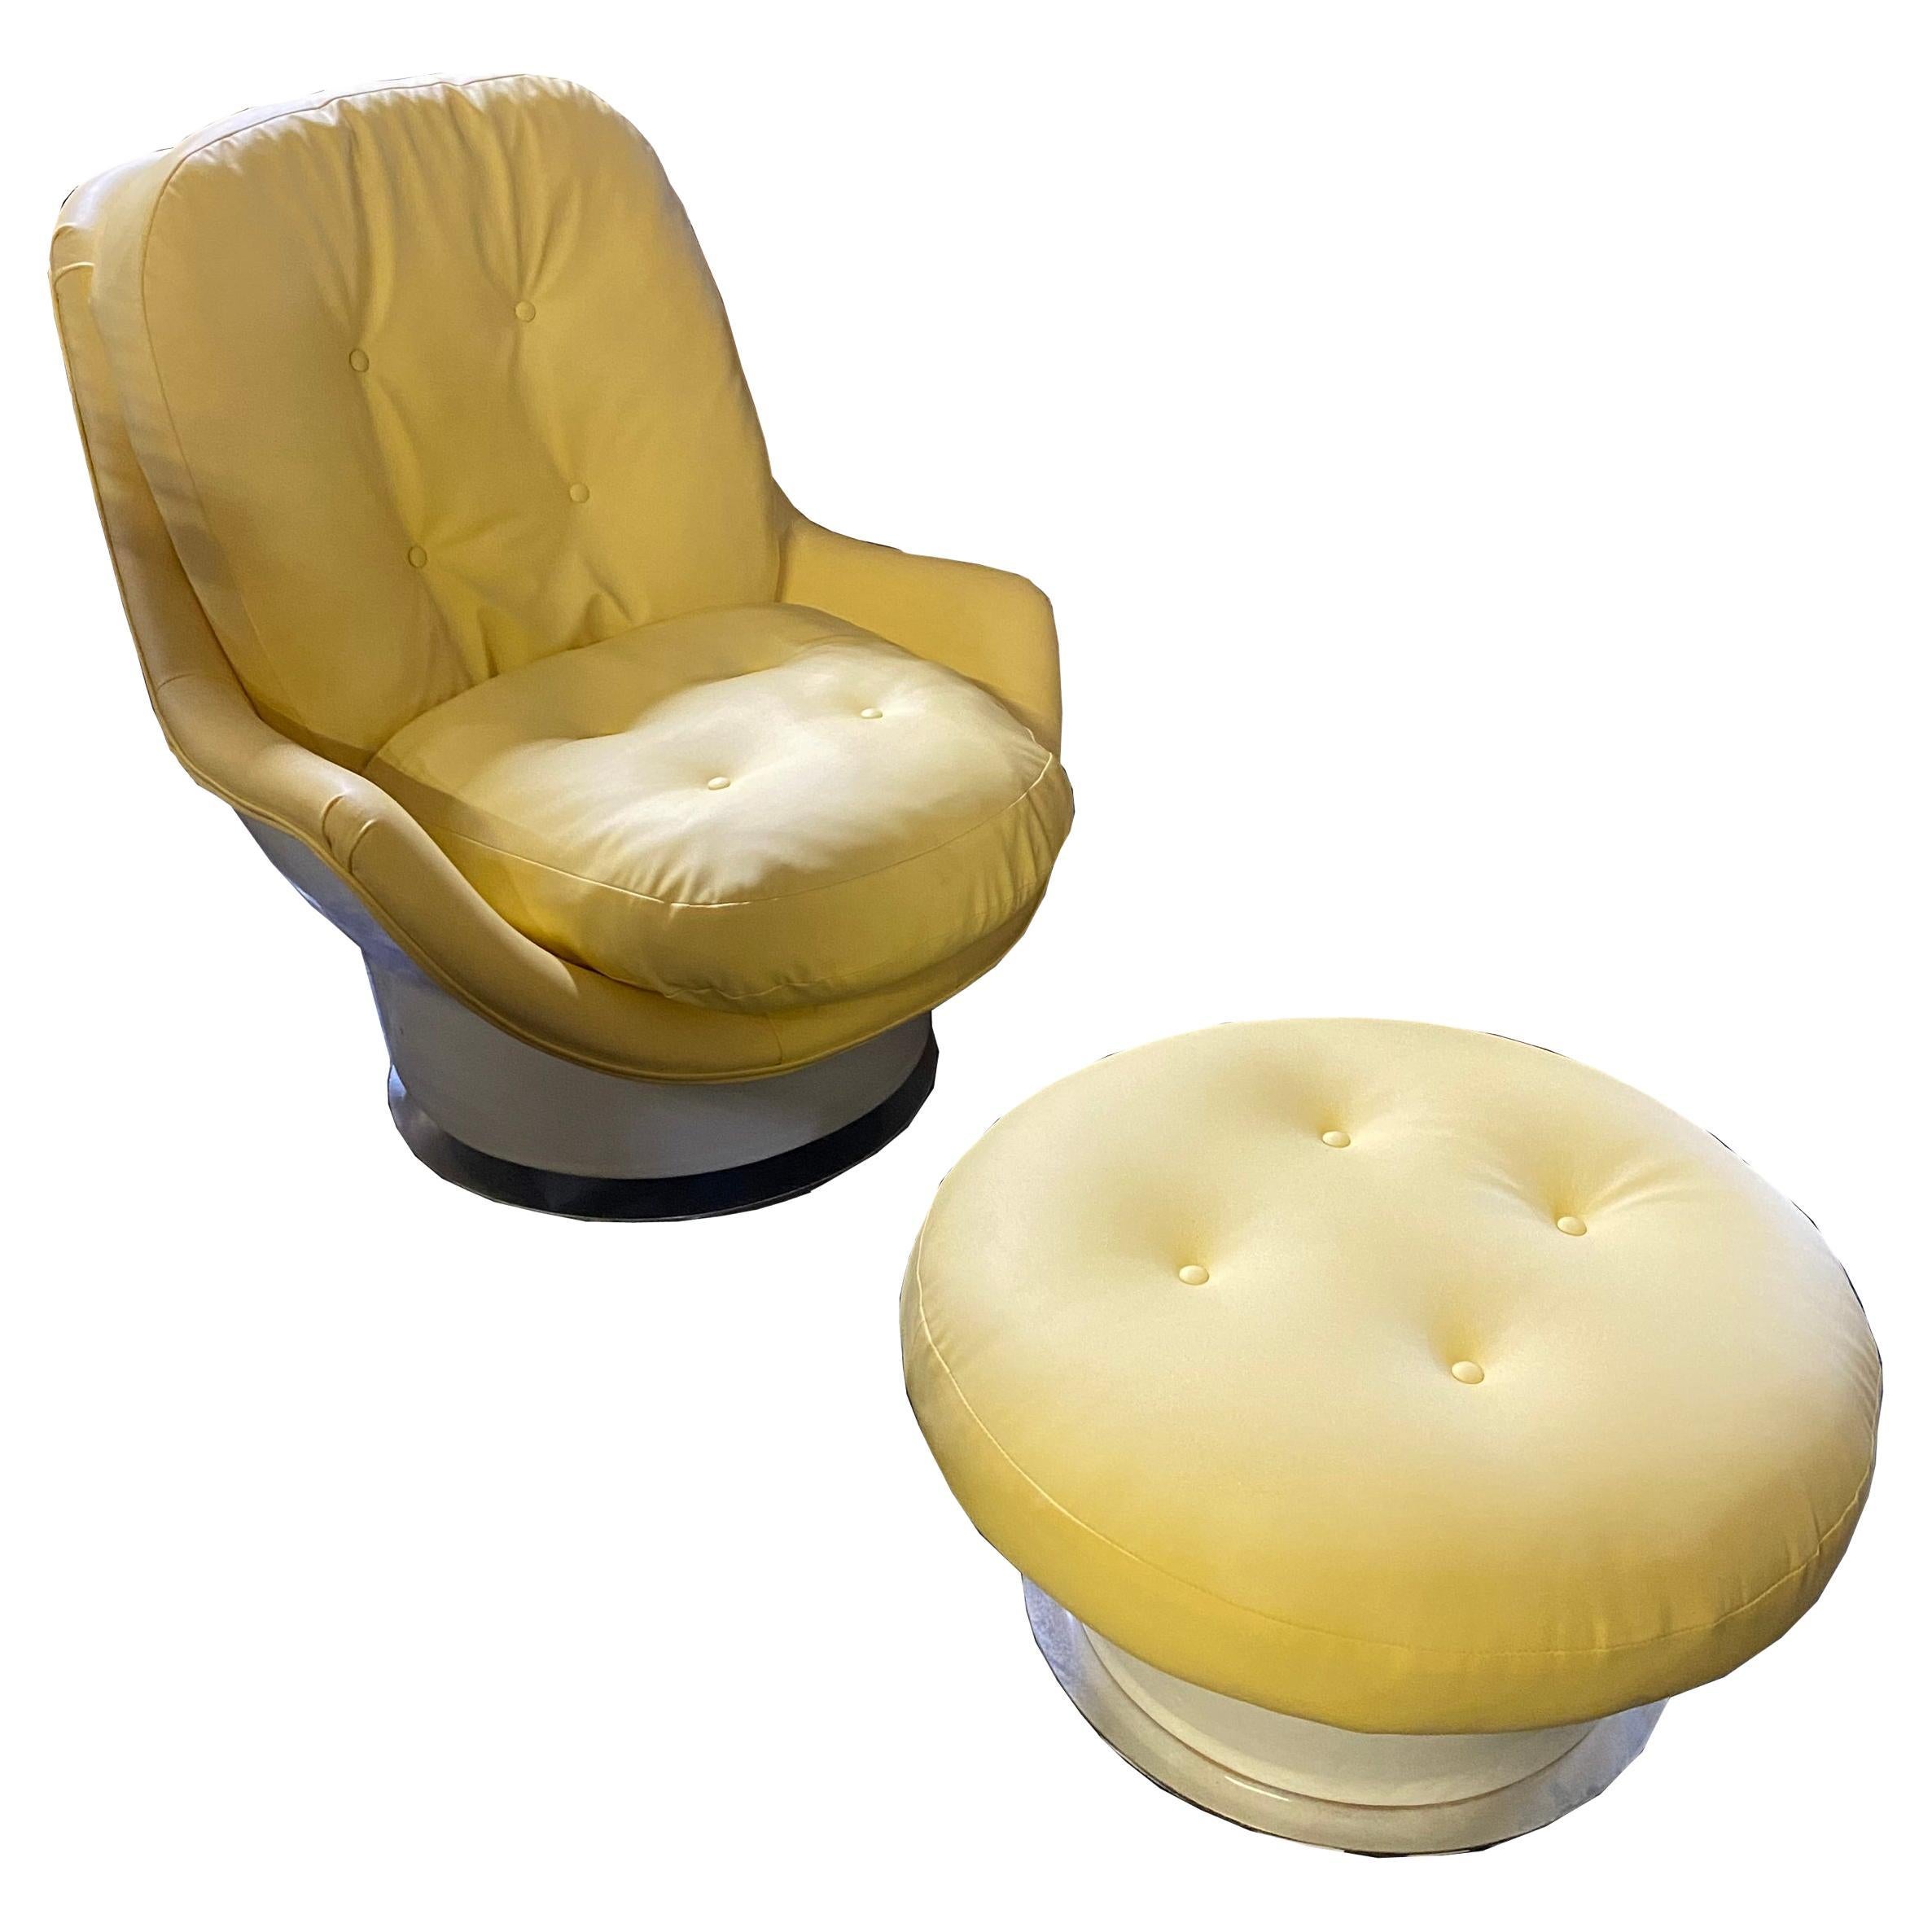 Vintage Milo Baughman Thayer Coggin Lounge Chair and Ottoman

Rare 70s lounge chair and ottoman. Fiberglass back and base with matching ottoman raised on chrome base. 
Rocks and swivels. Recently restored in rich buttercream vegan